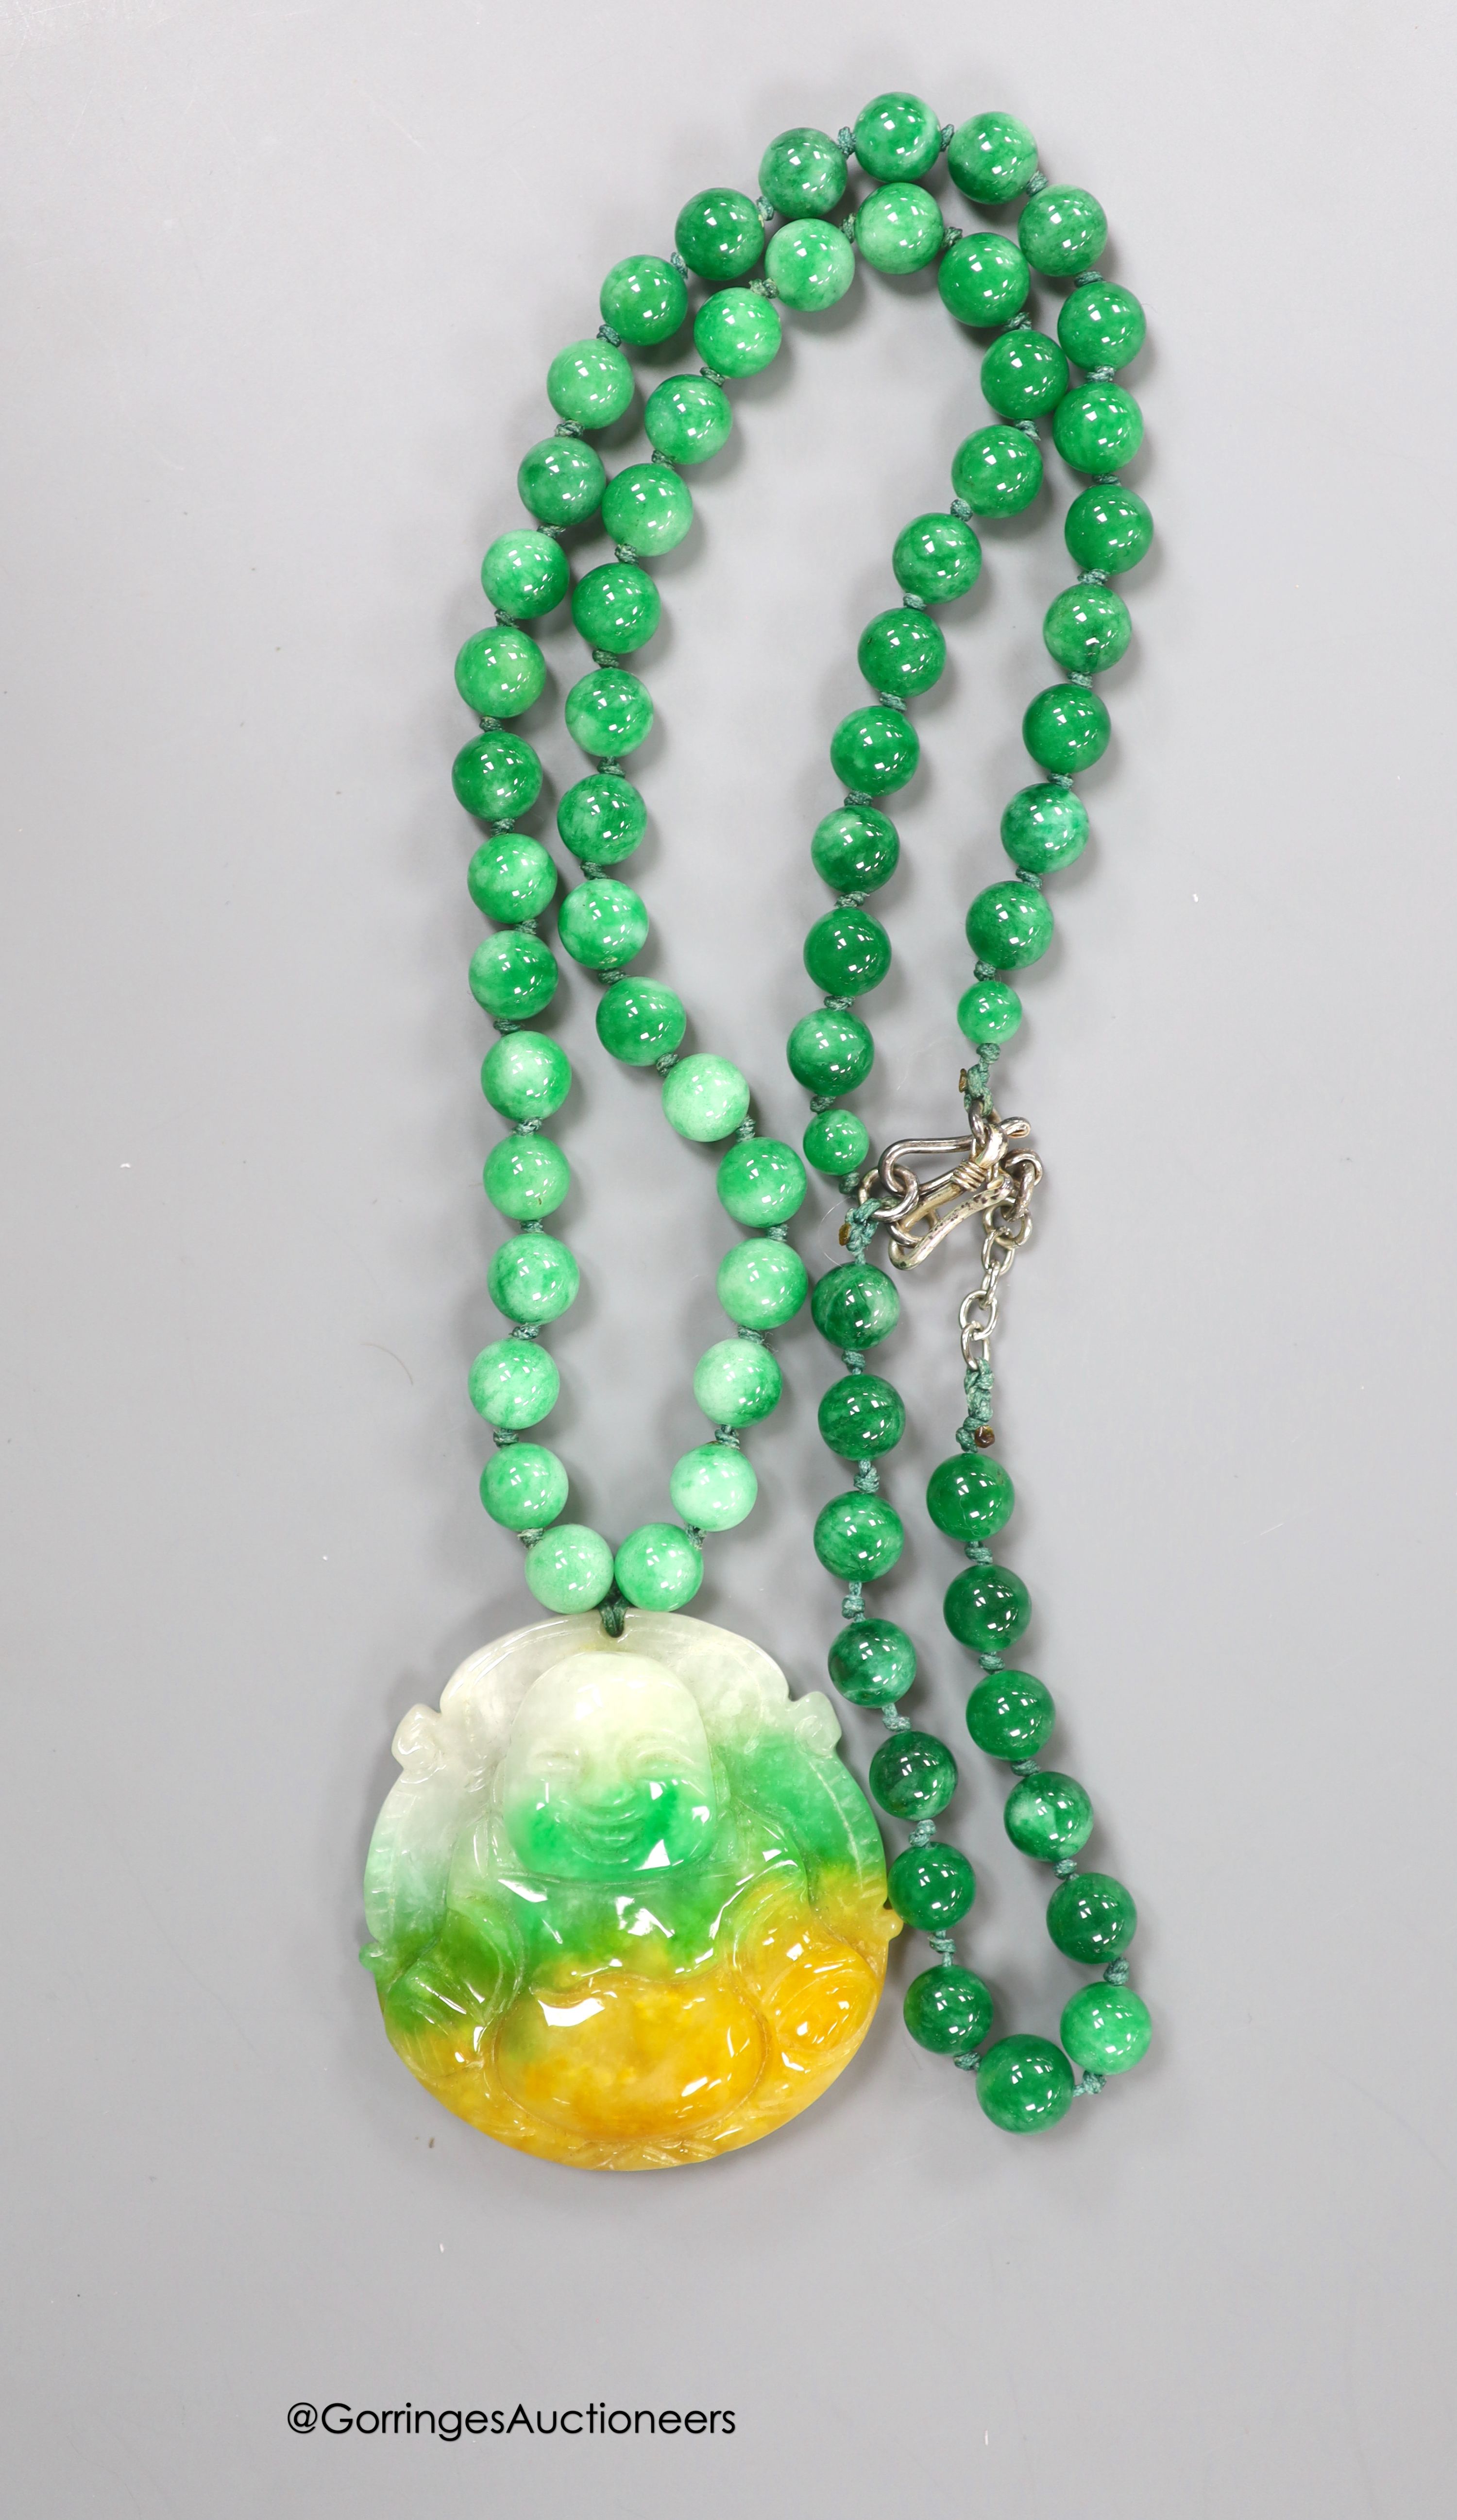 A jade pendant, carved as a Buddha, 50mmm, on a jade bead necklace, 50cm, together with a jade bead bracelet.